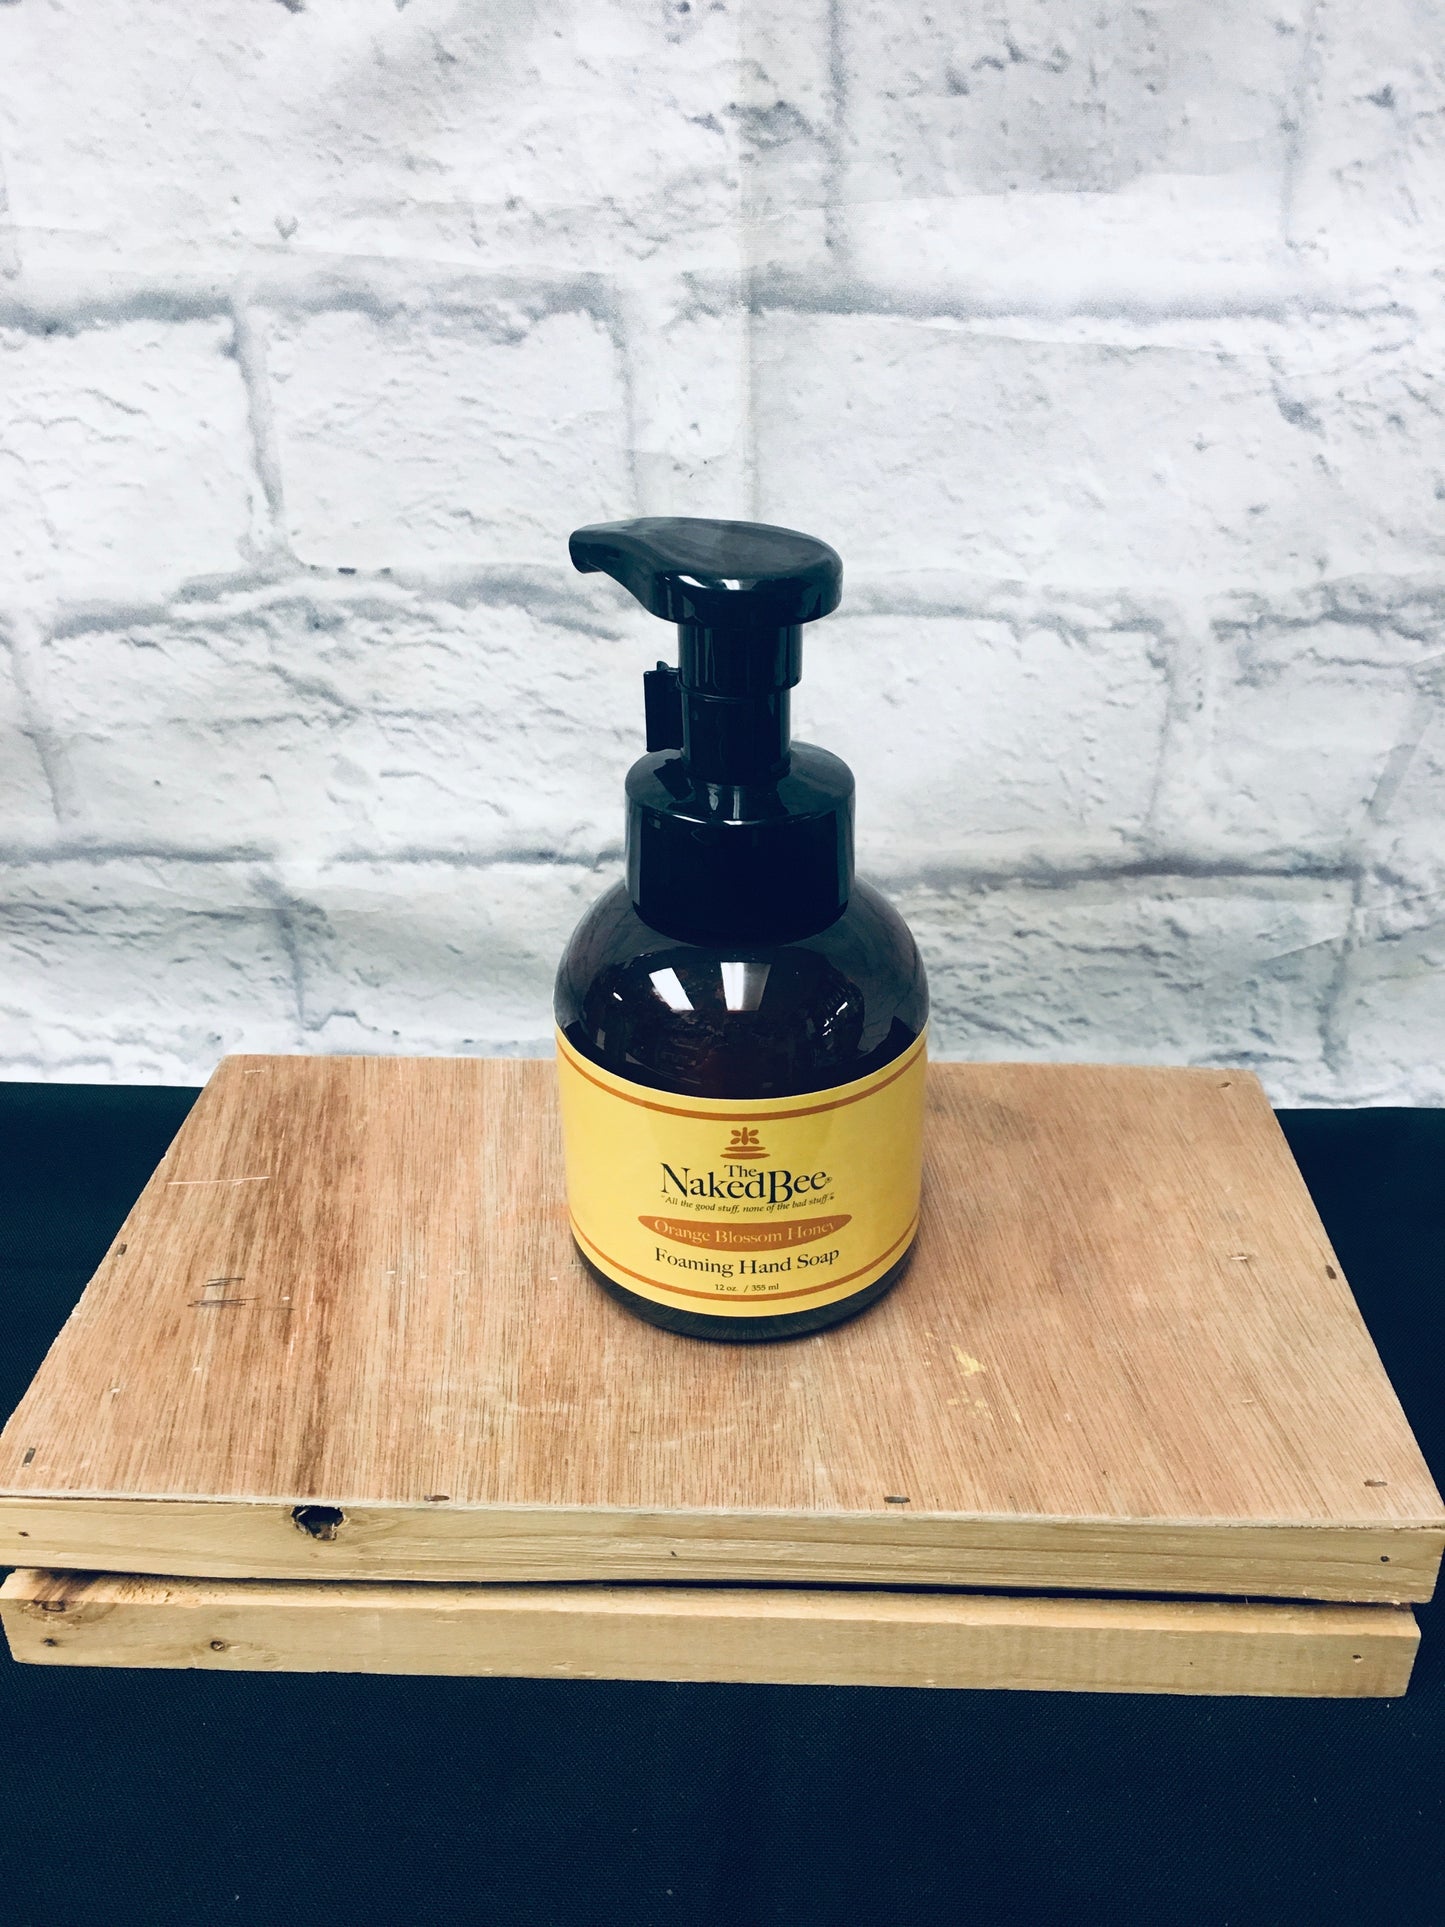 The naked bee foaming hand soap